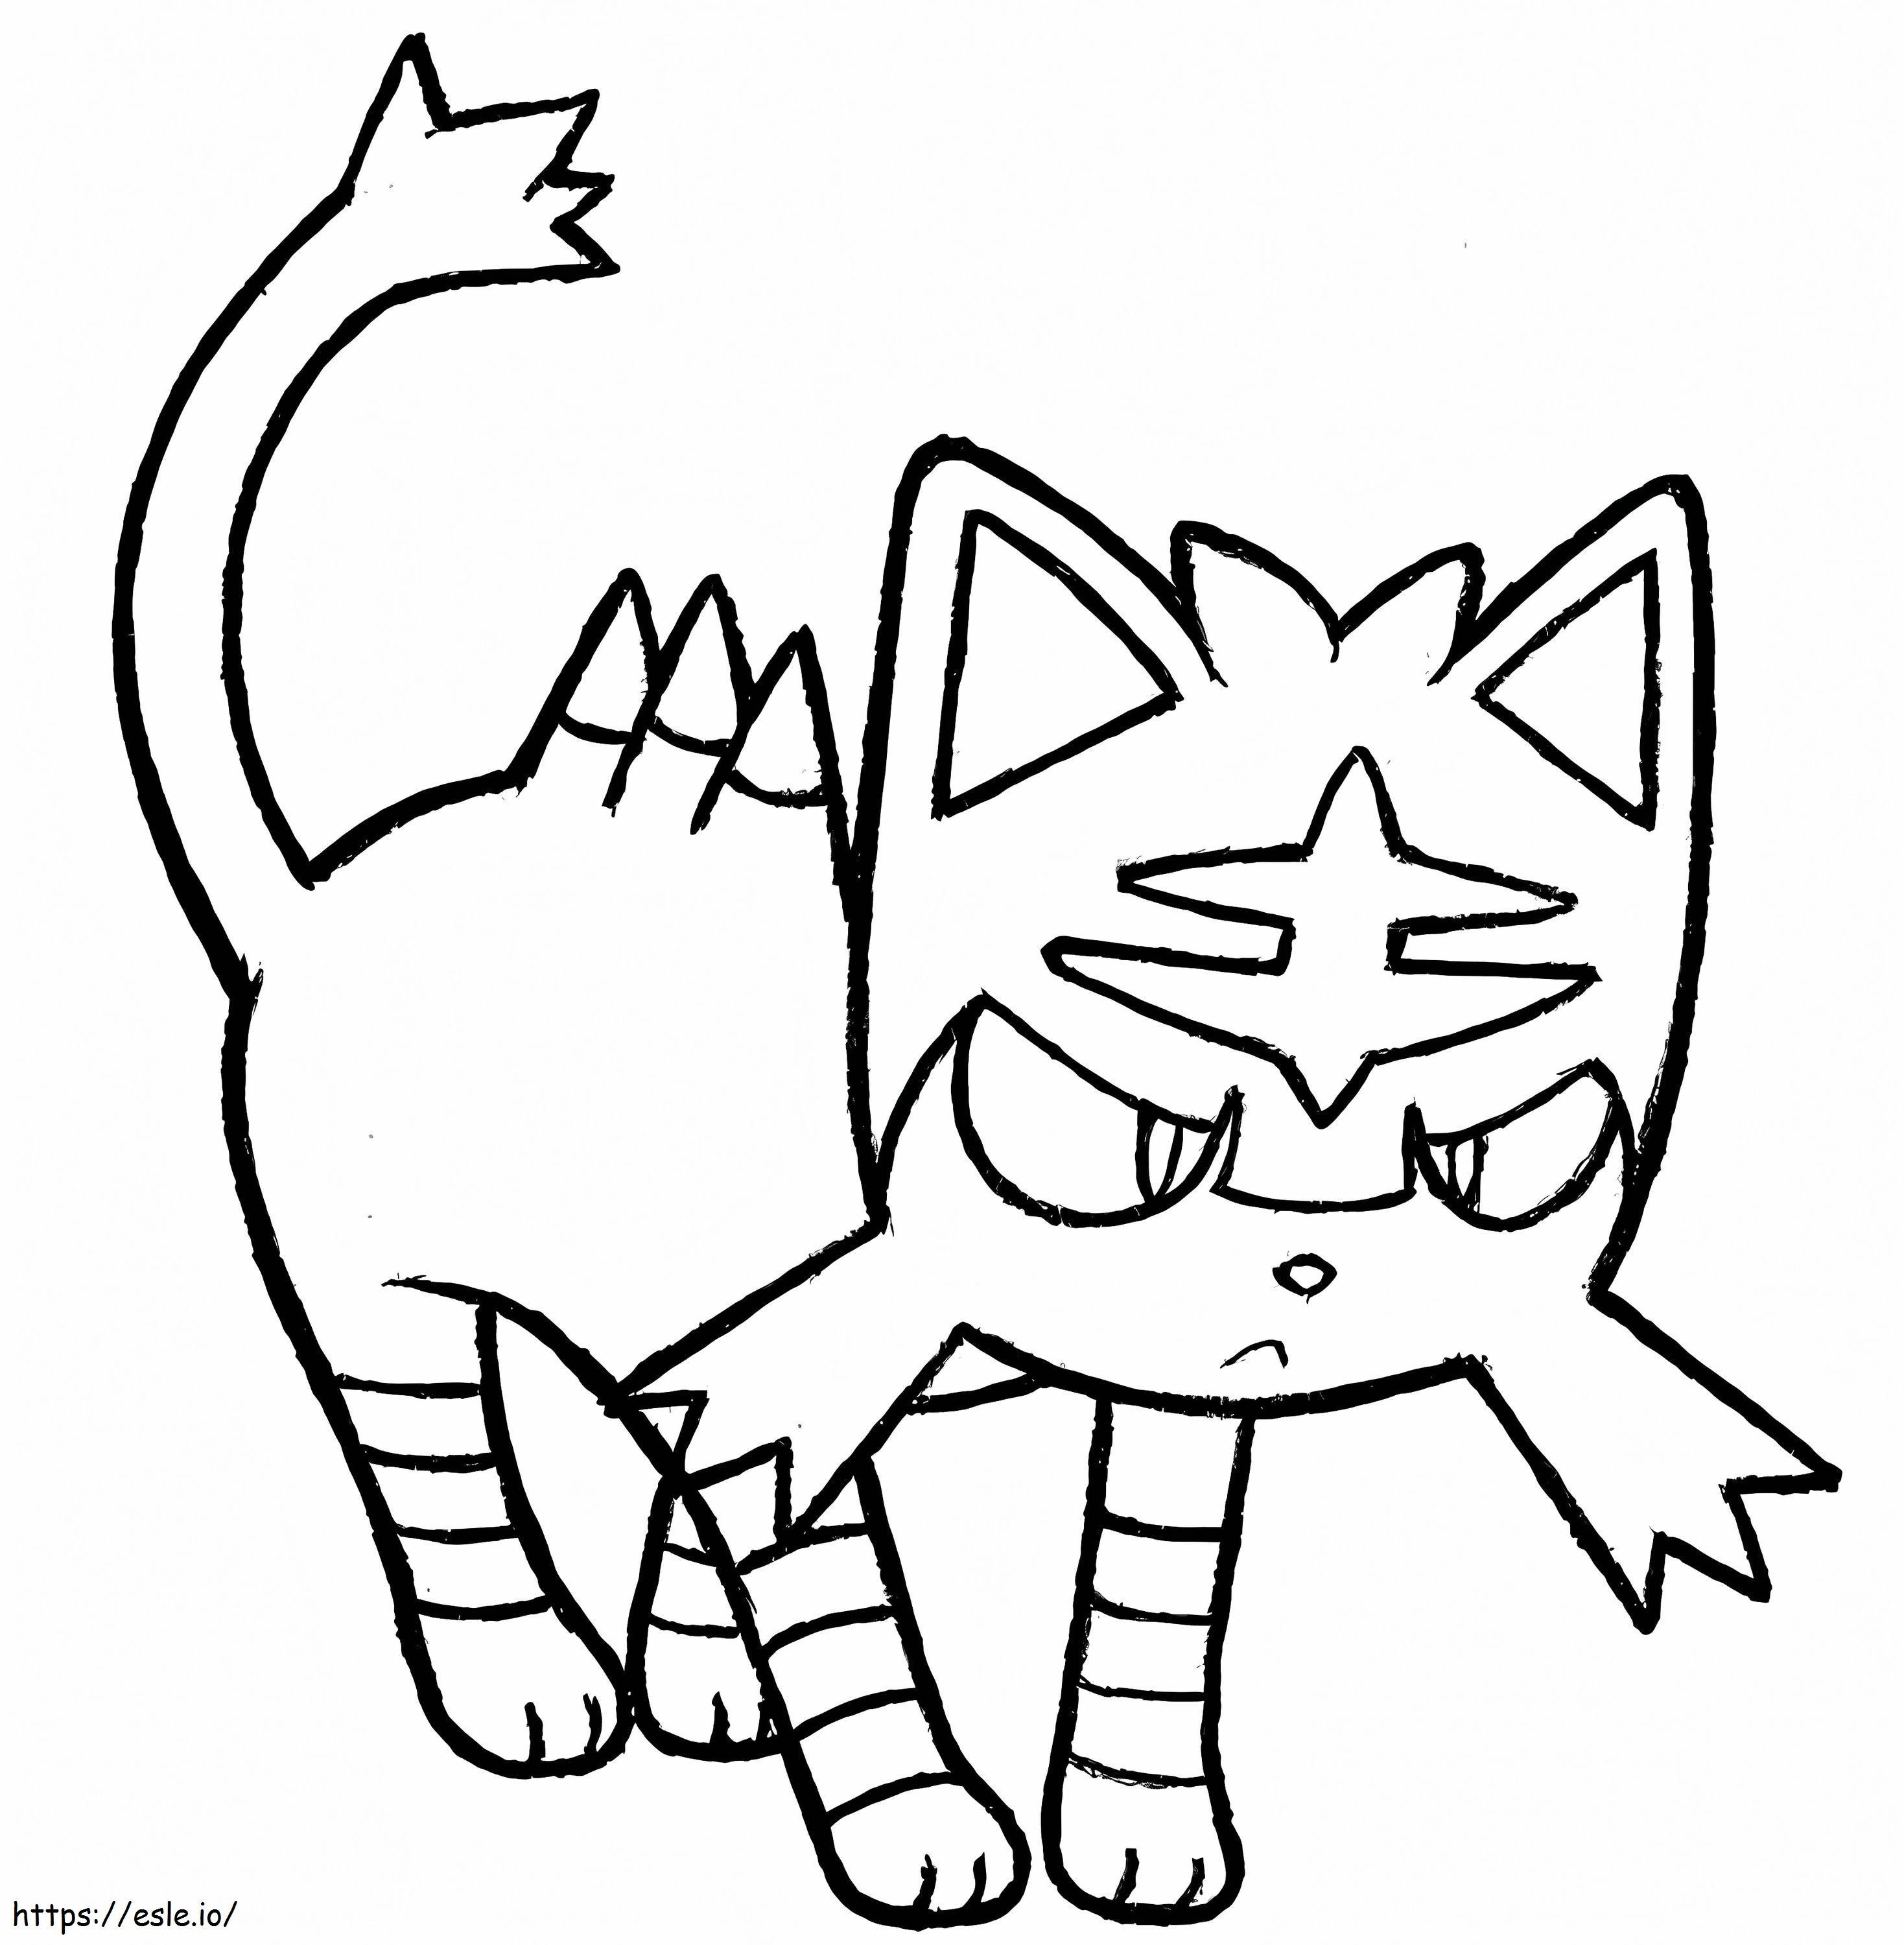 Leave 3 coloring page